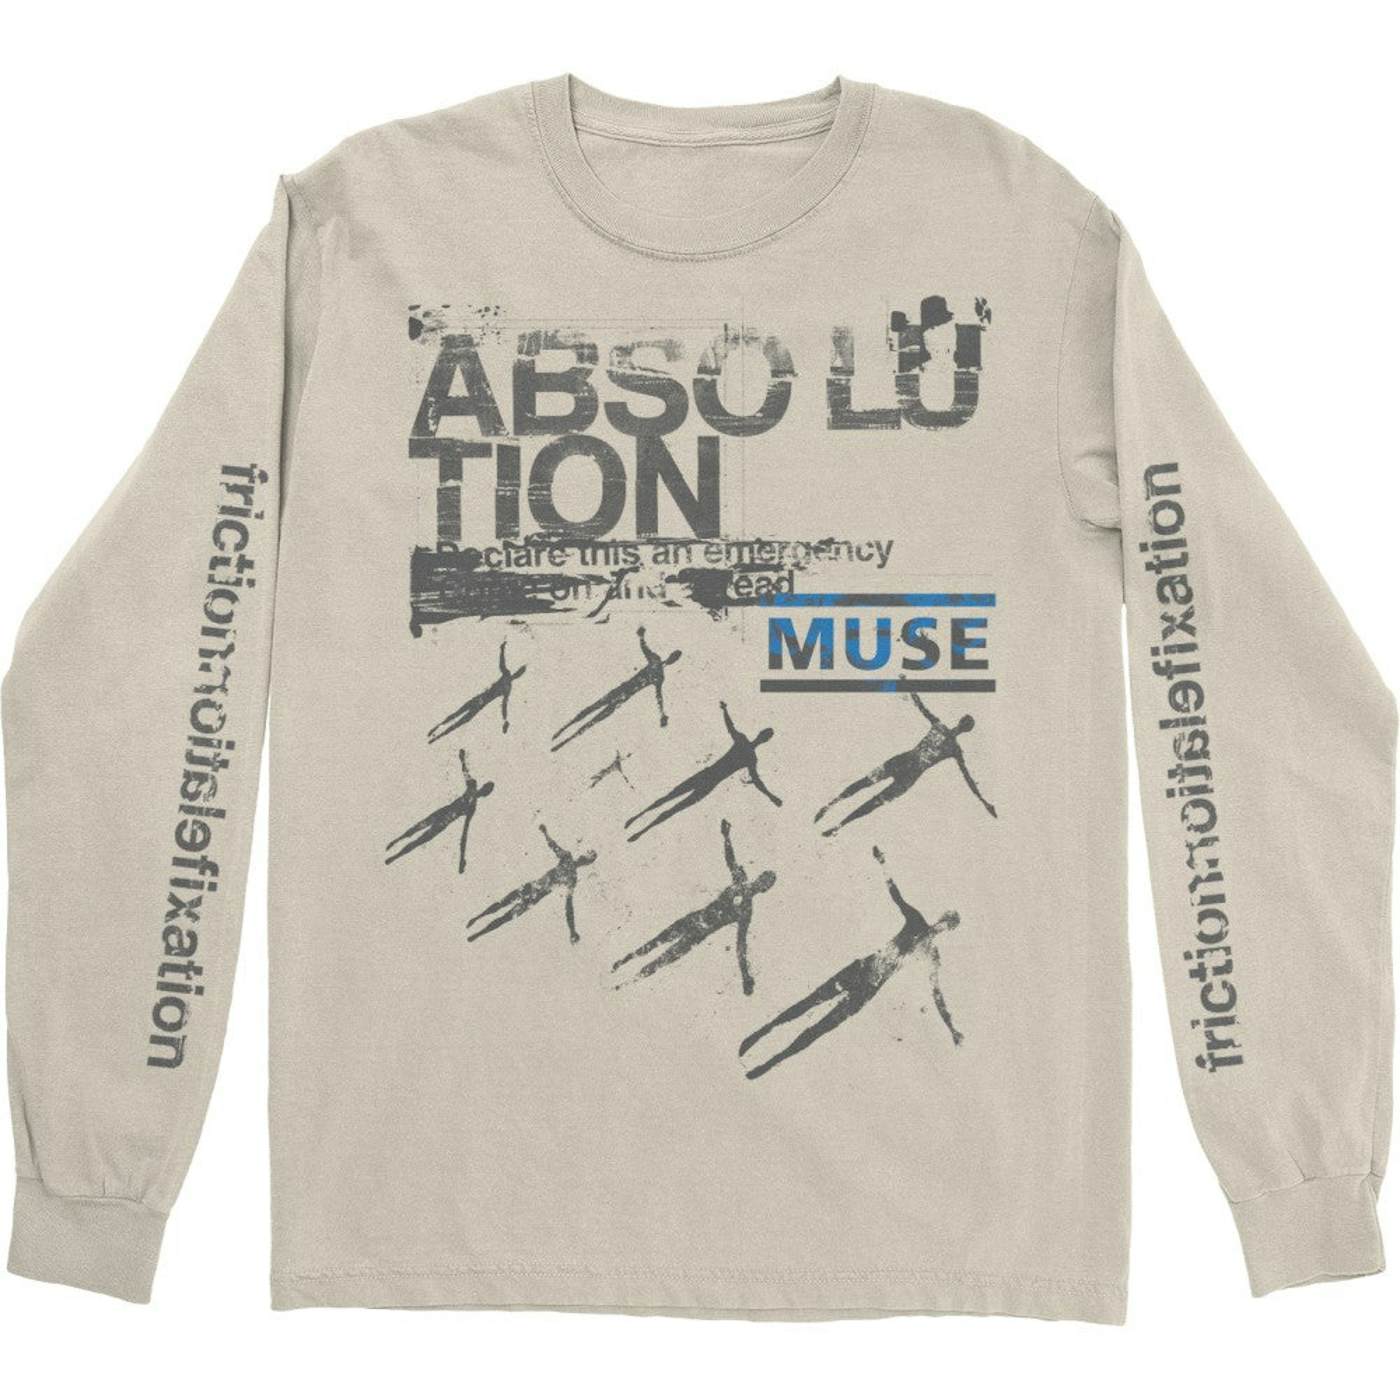 Muse Absolution XX Friction White Longsleeve T-Shirt $44.33